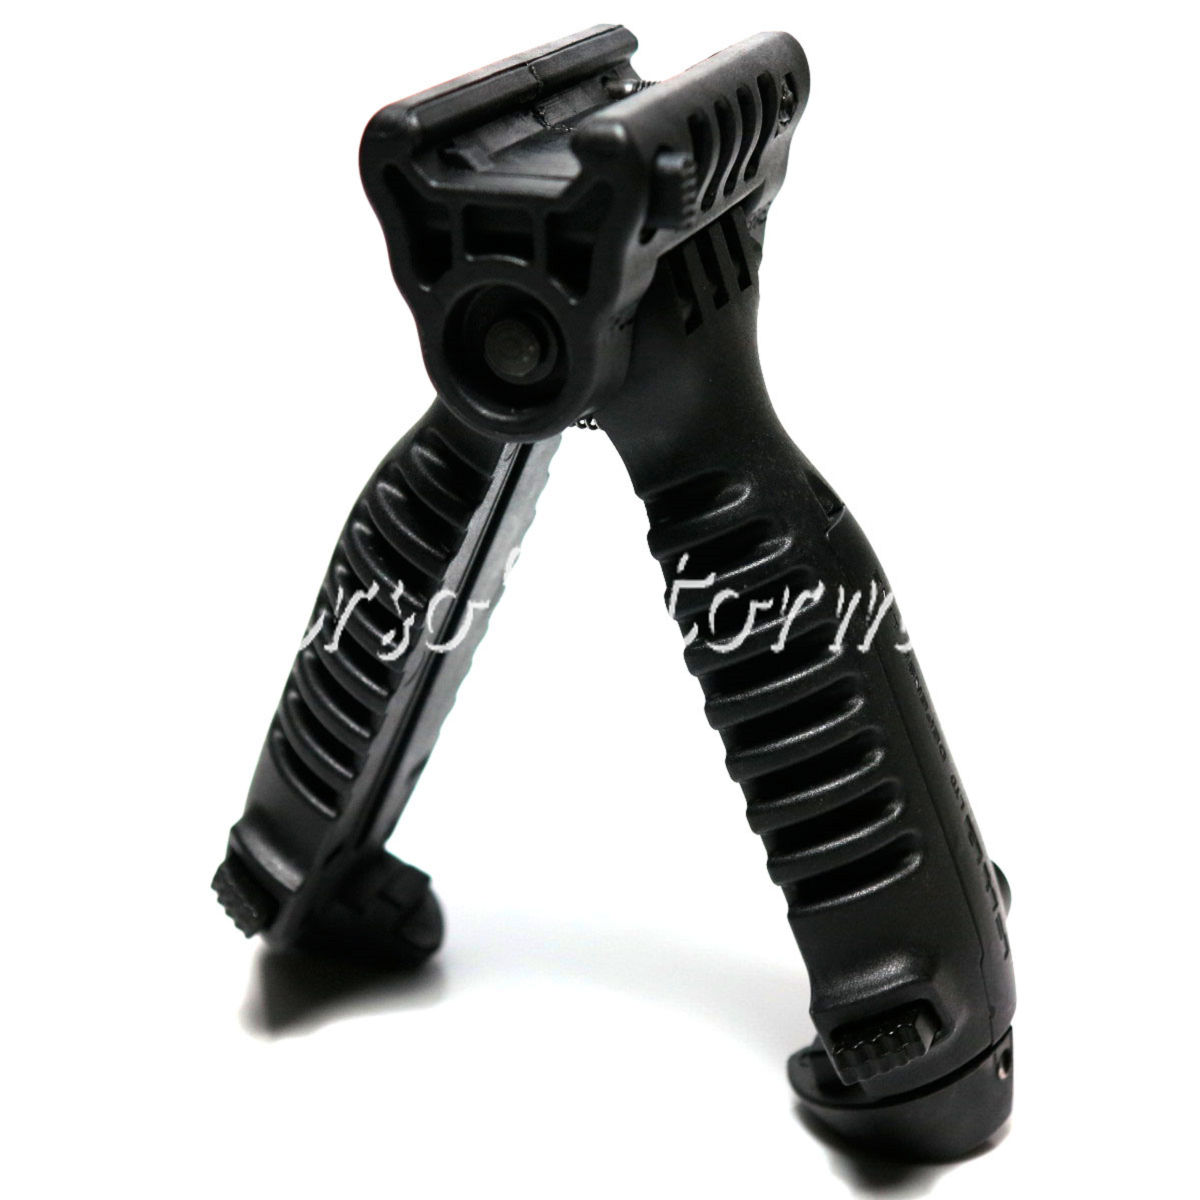 Airsoft Tactical Gear 20mm RIS Spring Total Bipod Foregrip Grip Black